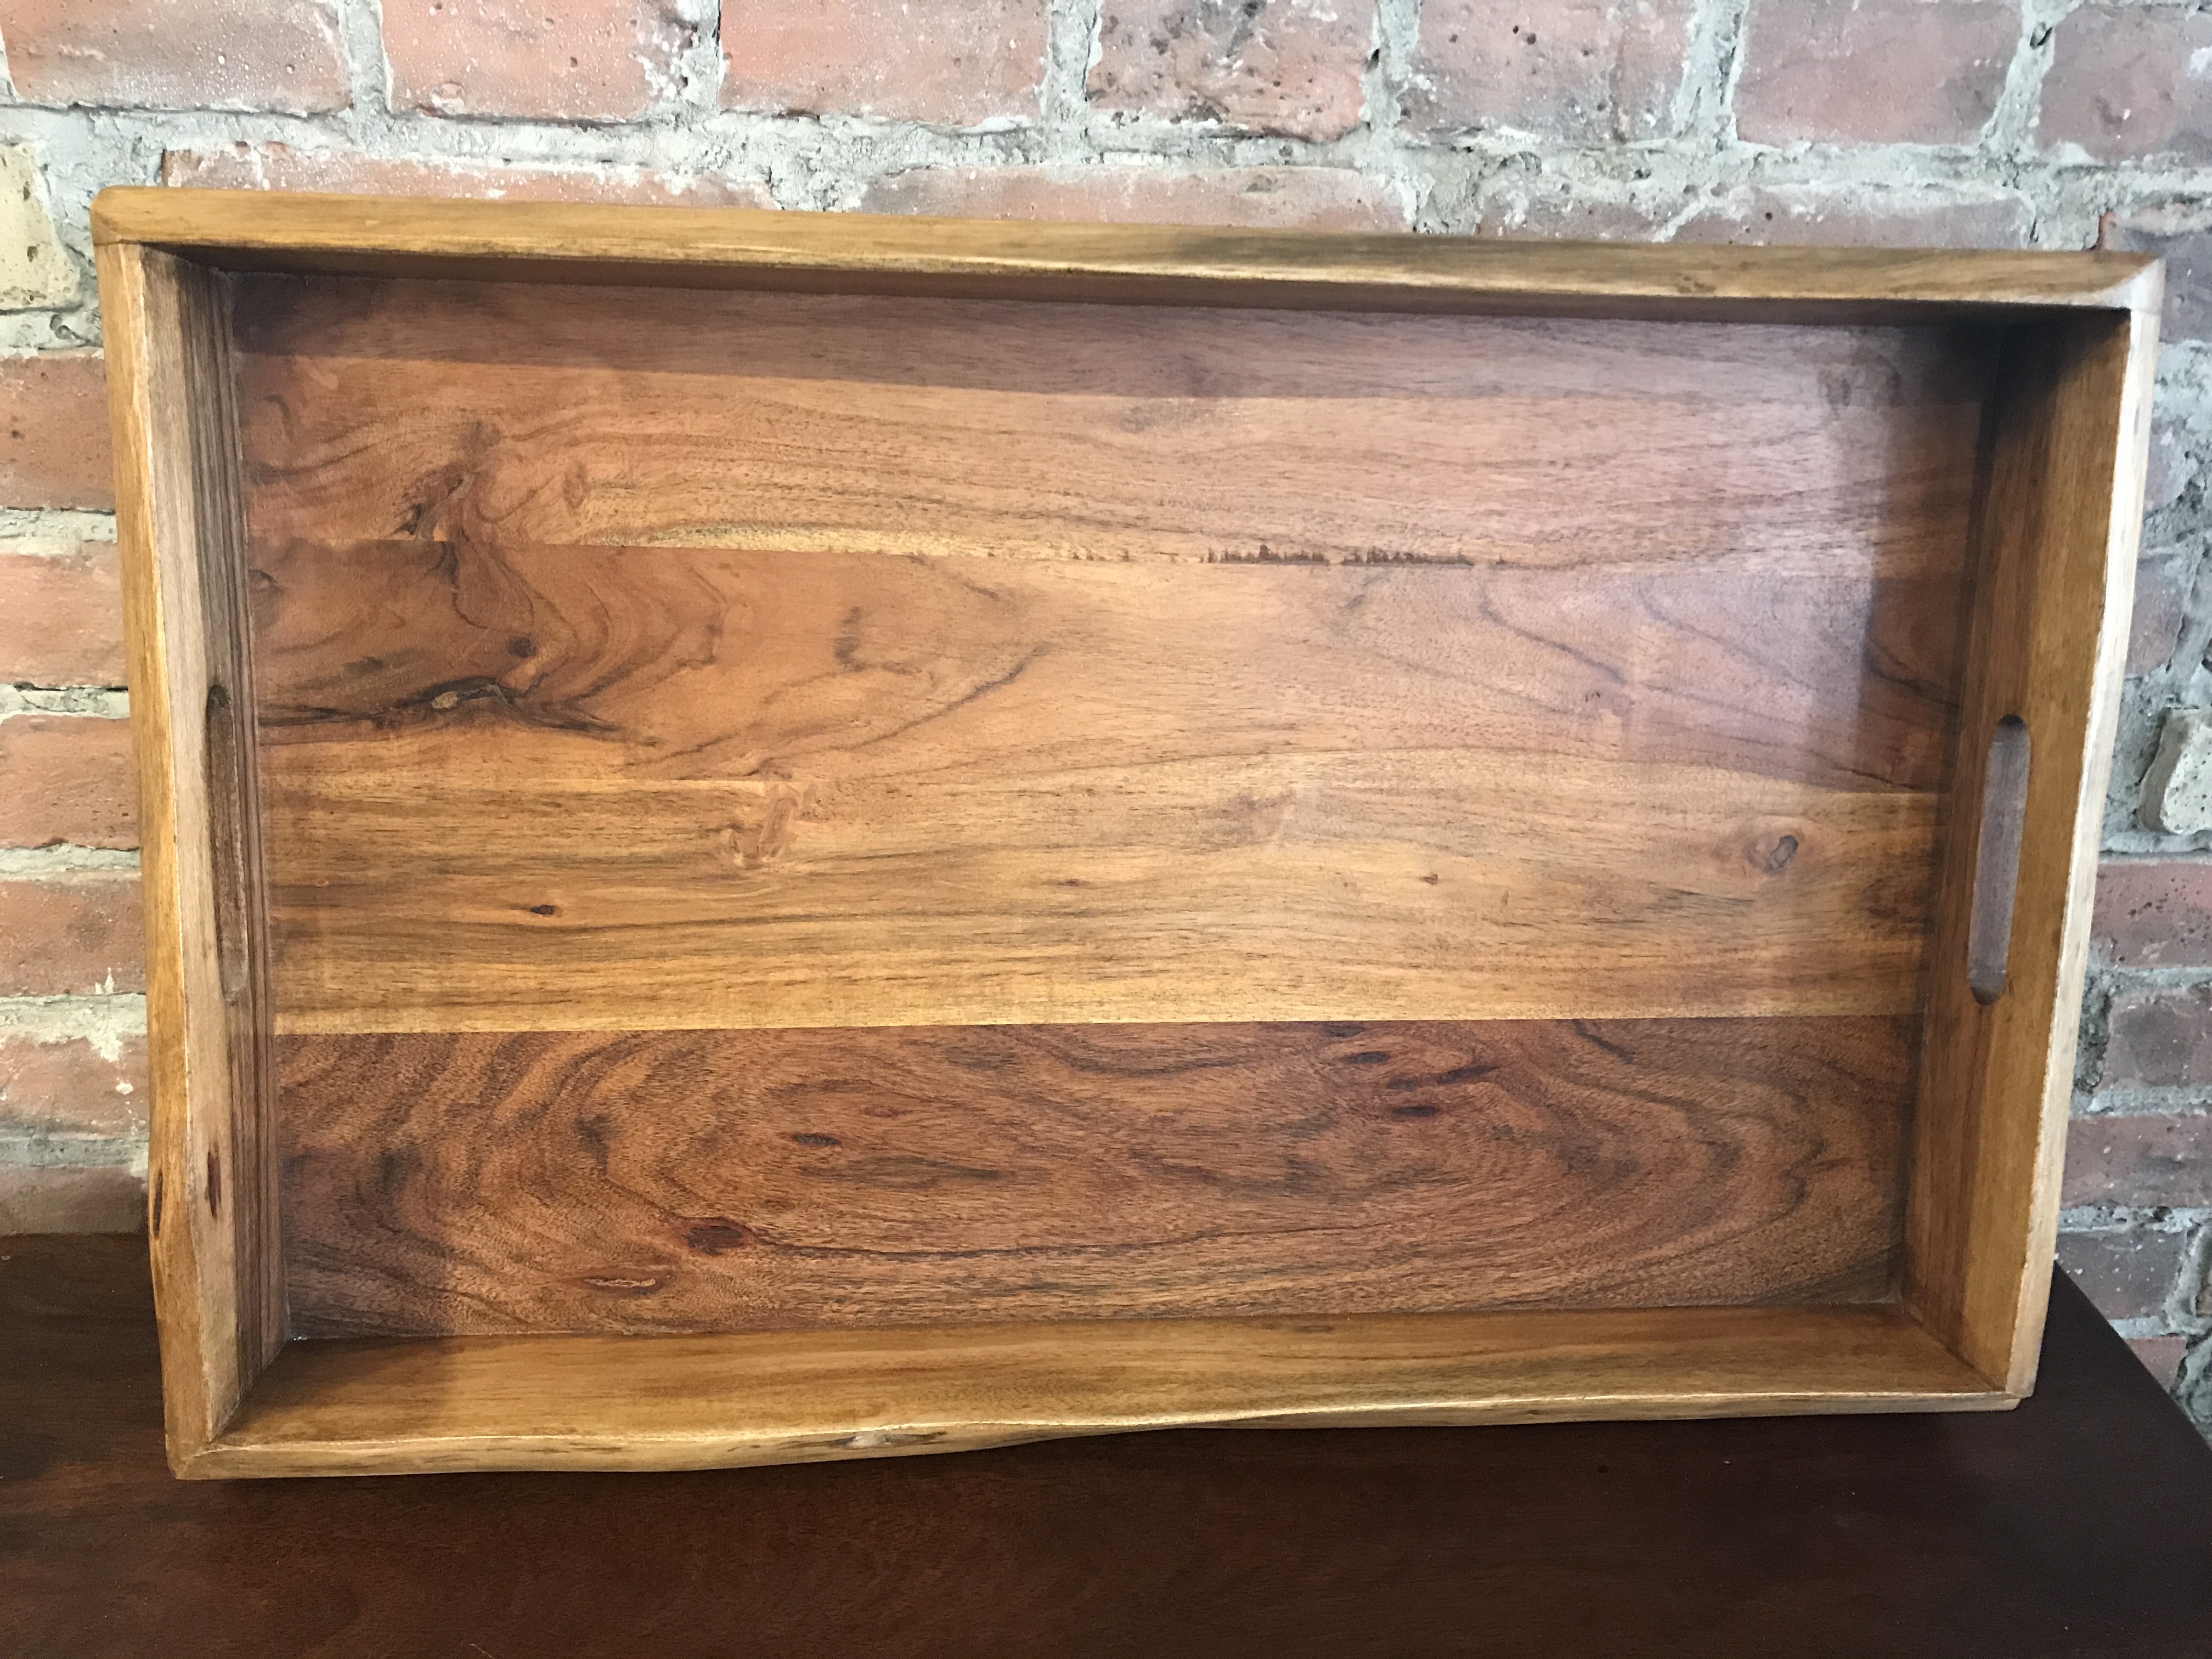 WOODEN TRAY - LARGE